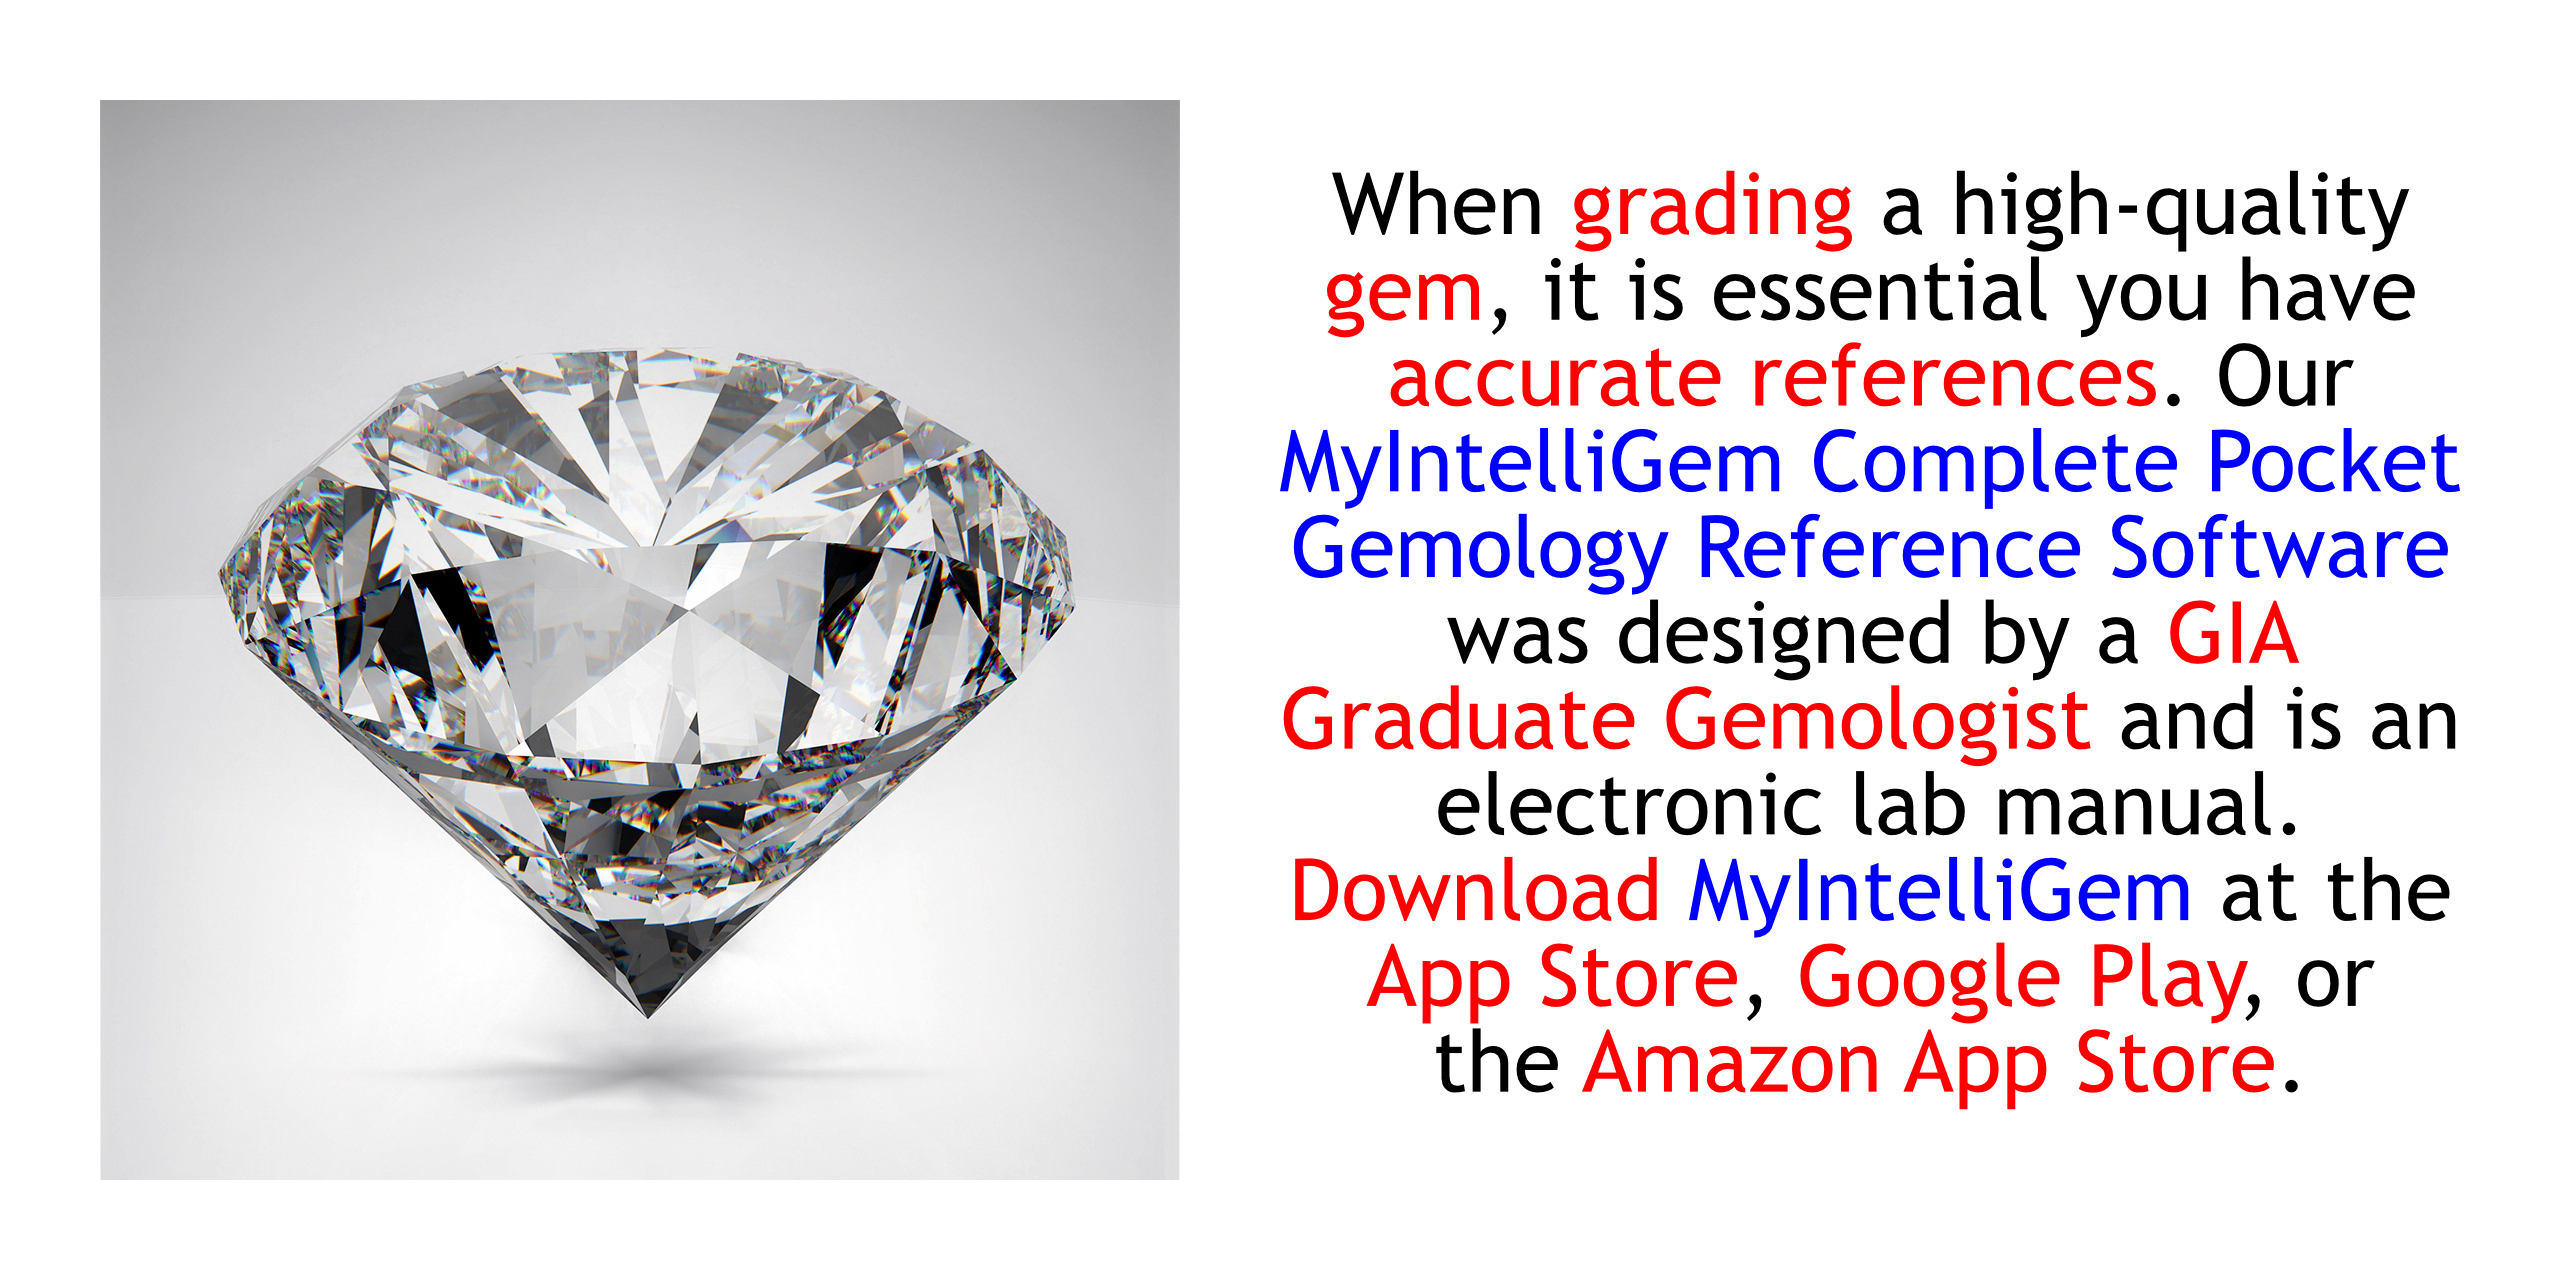 When grading a high quality gem, it is essential you have accurate references.  Our MyIntelliGem Complete Pocket Gemology Reference Application was designed by a GIA Graduate Gemologist and is an electronic lab manual.  DOWNLOAD MYINTELLIGEM AT THE APP STORE, GOOGLE PLAY, OR THE AMAZON APP STORE.